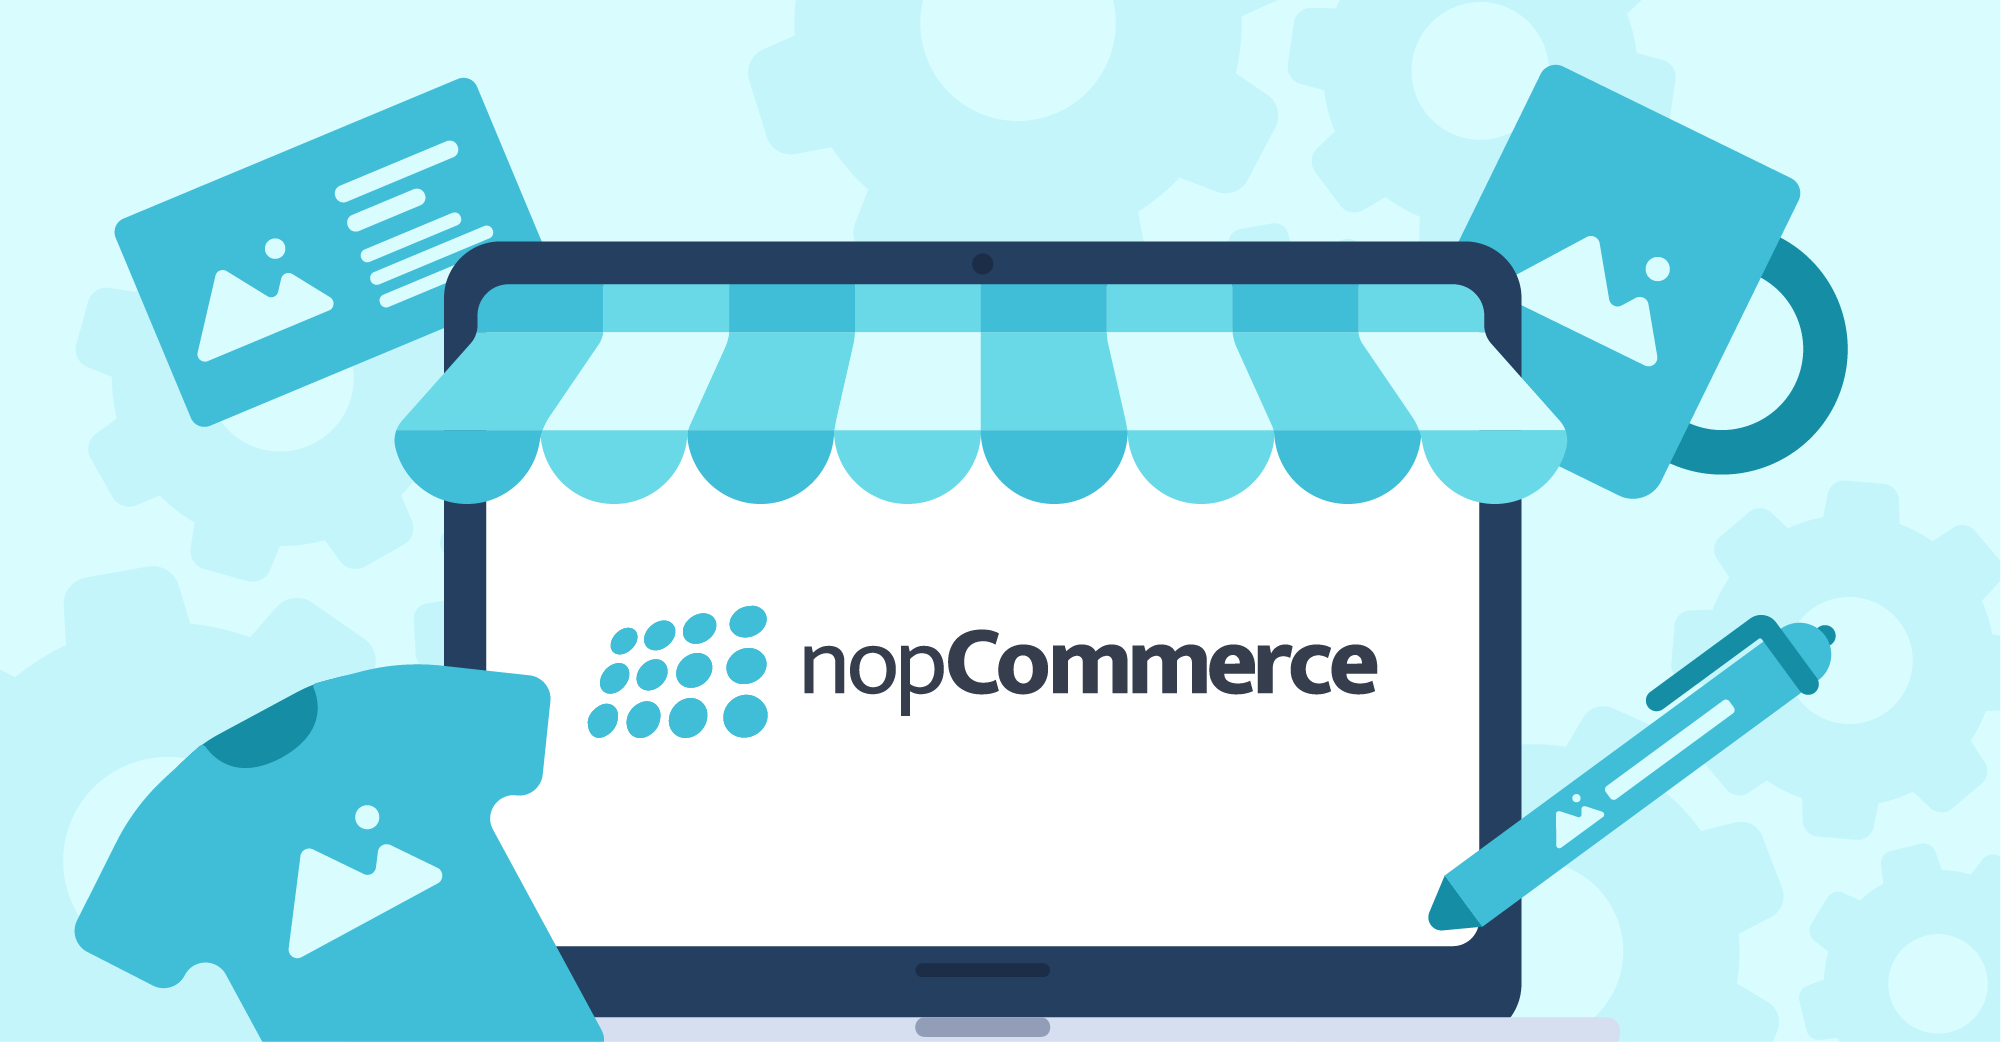 Explore the web-to-print integration with nopCommerce through our demo storefront 